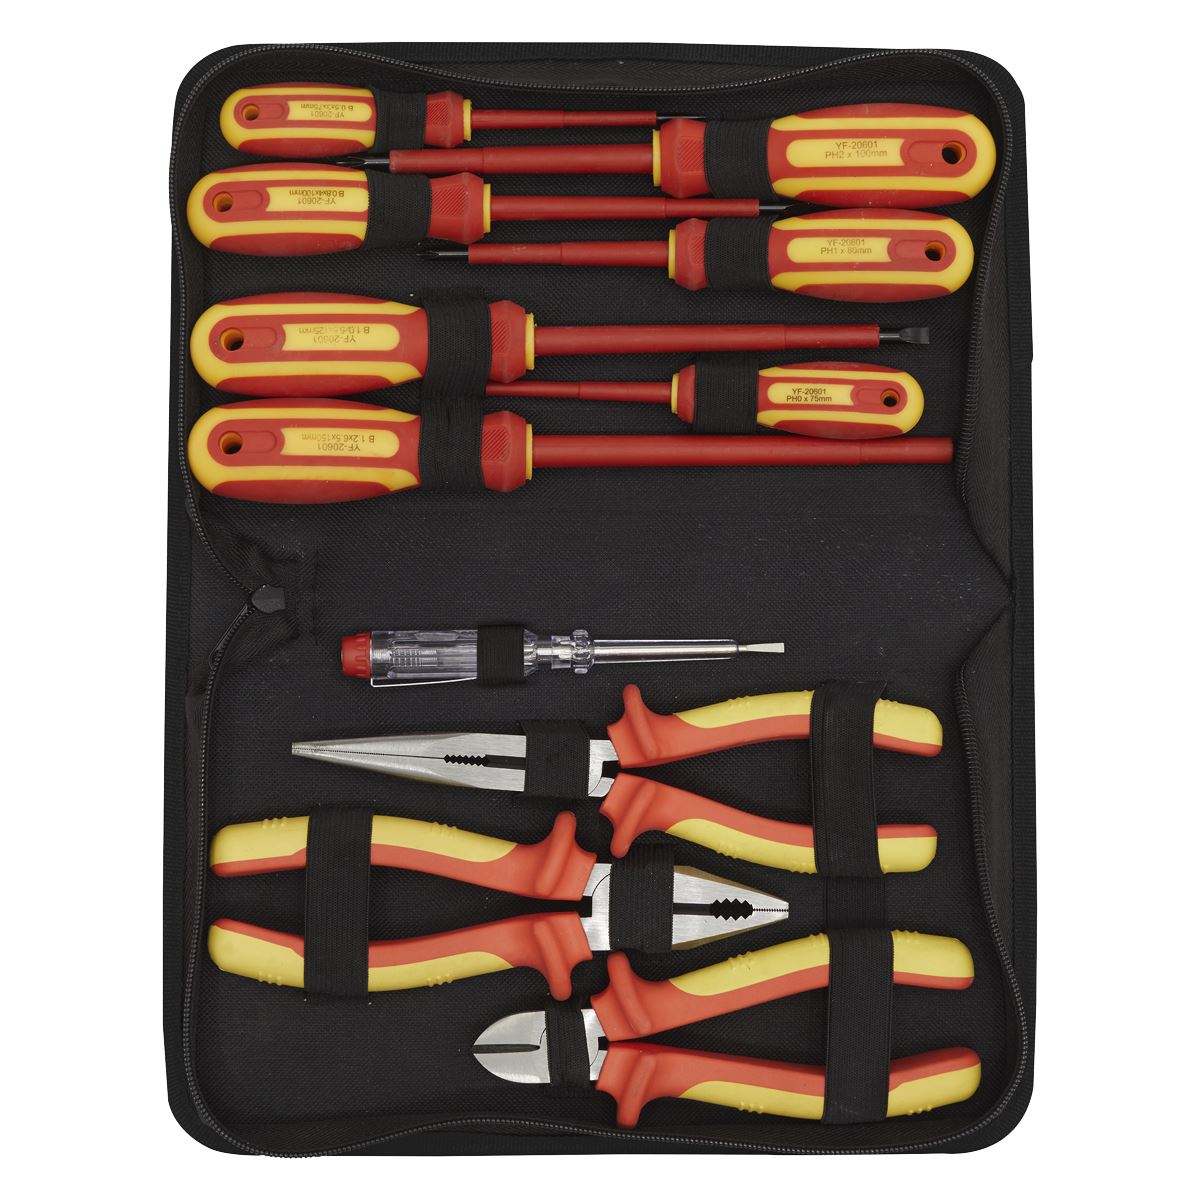 Siegen by Sealey Electrical VDE Tool Set 11 Piece Pliers Screwdrivers